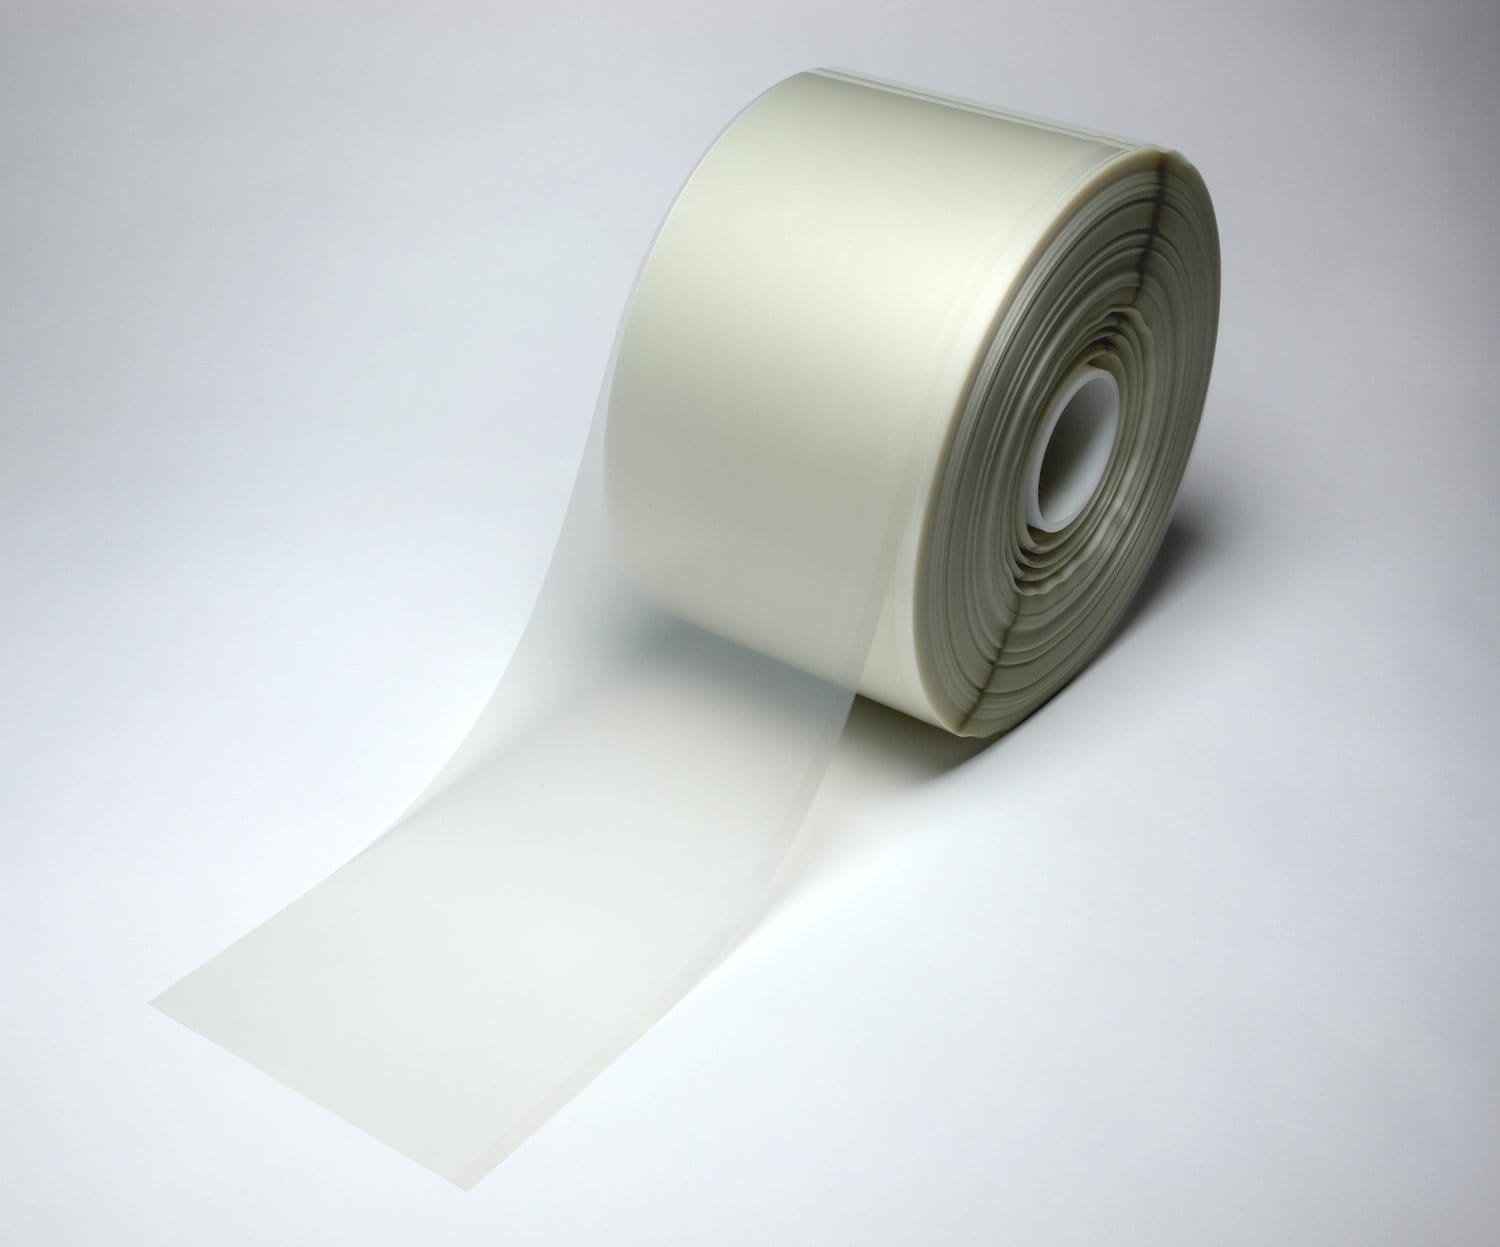 7100123679 - 3M Optically Clear Adhesive 8213, configurable product, roll